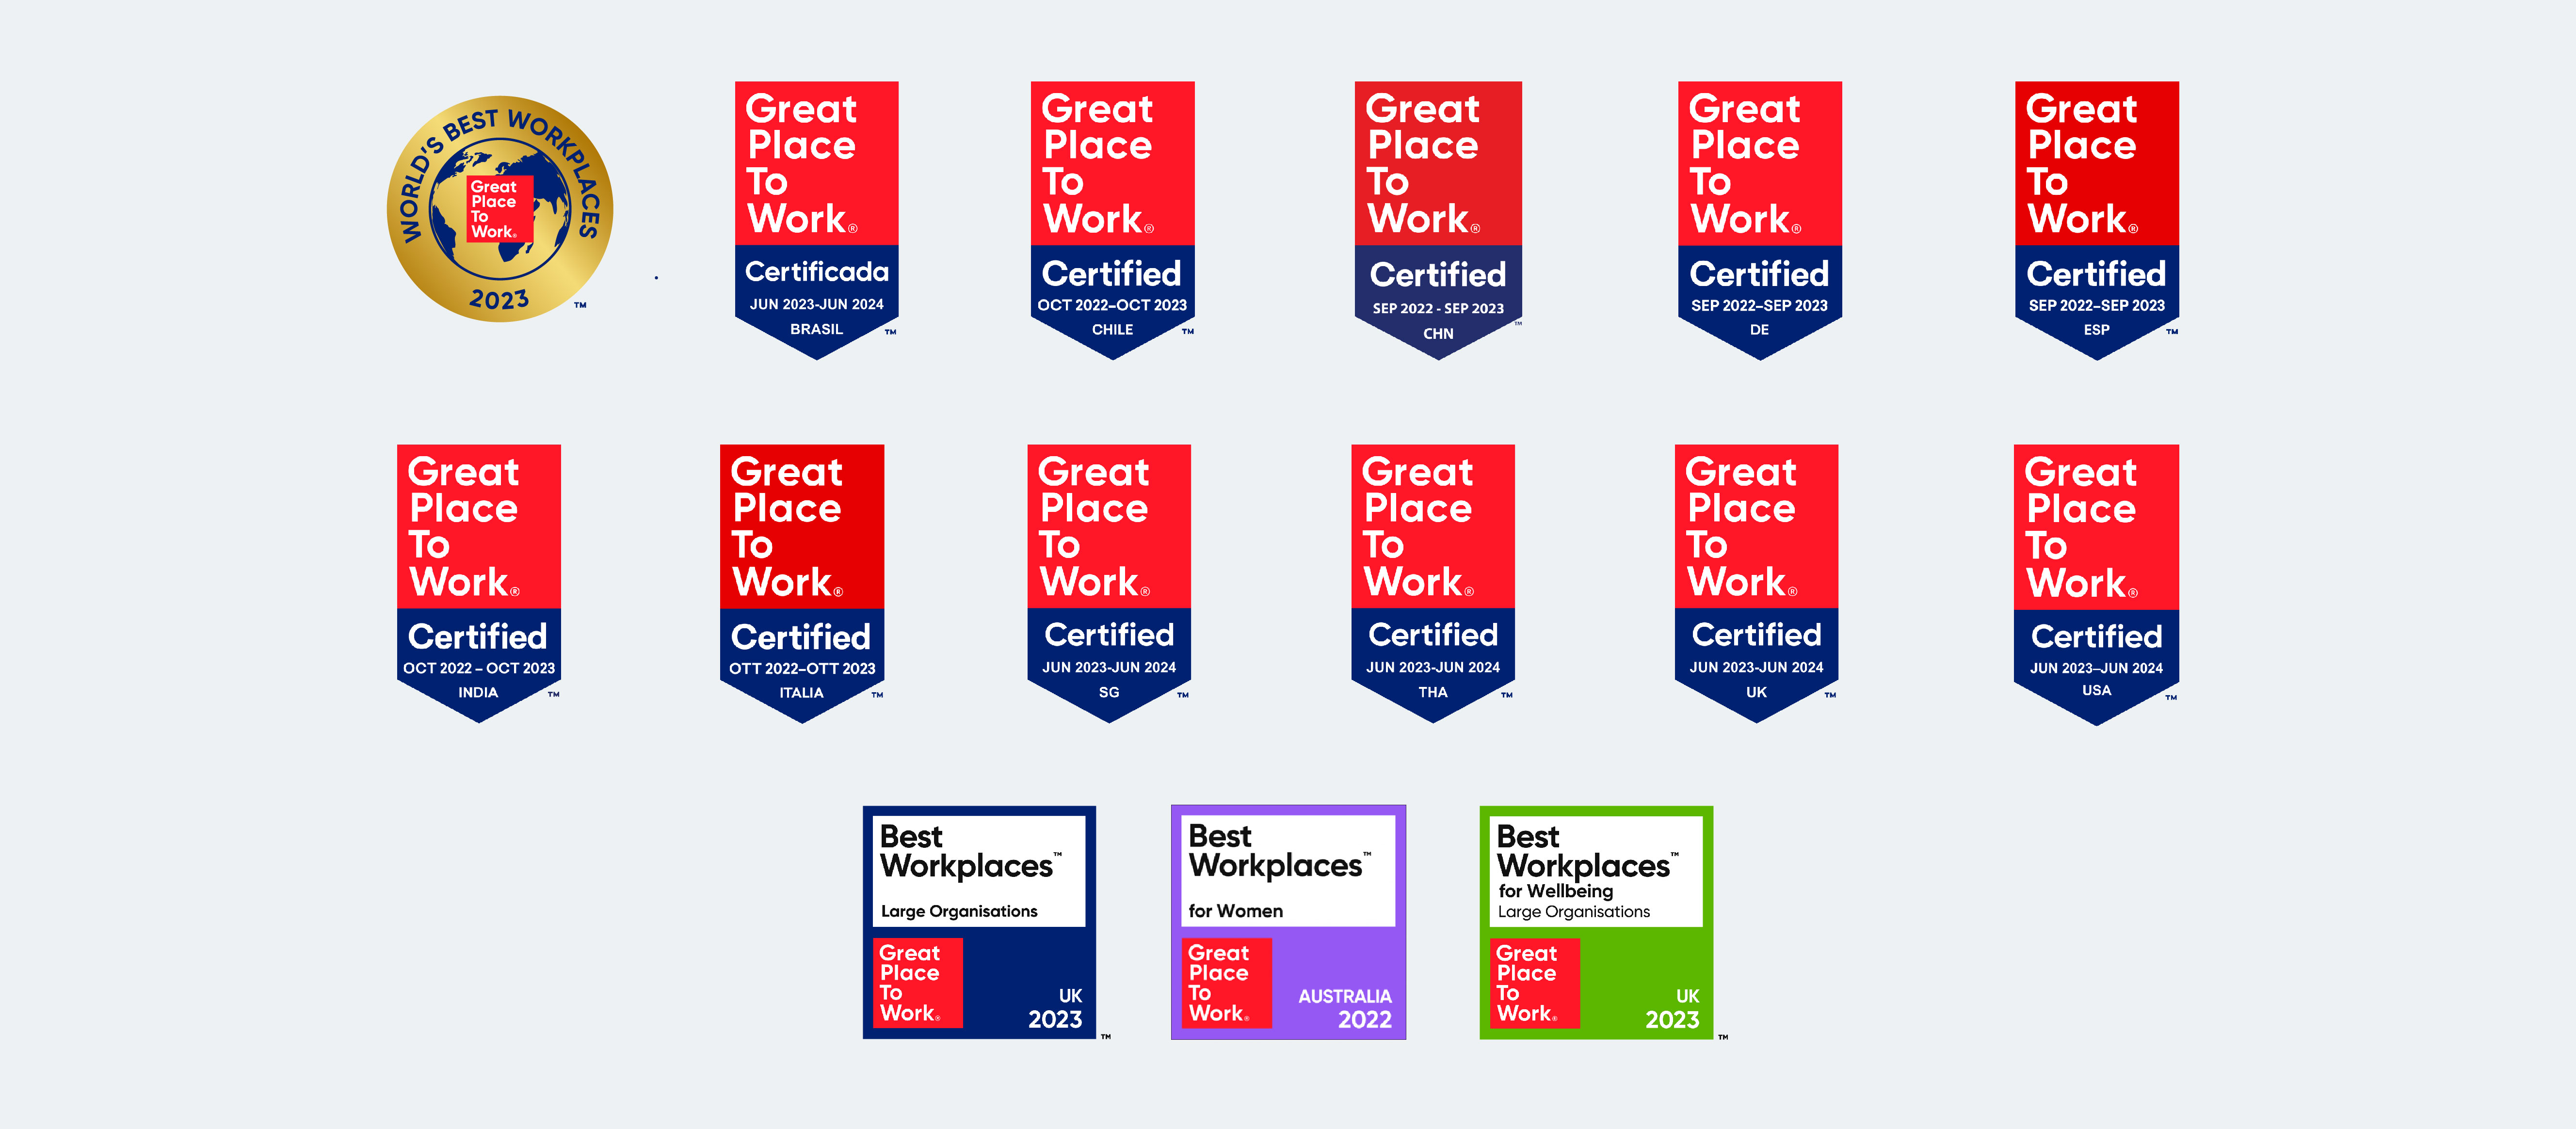 A variety of logos showing that Thoughtworks has been certified as a Great Place to Work in a number of regions across the globe